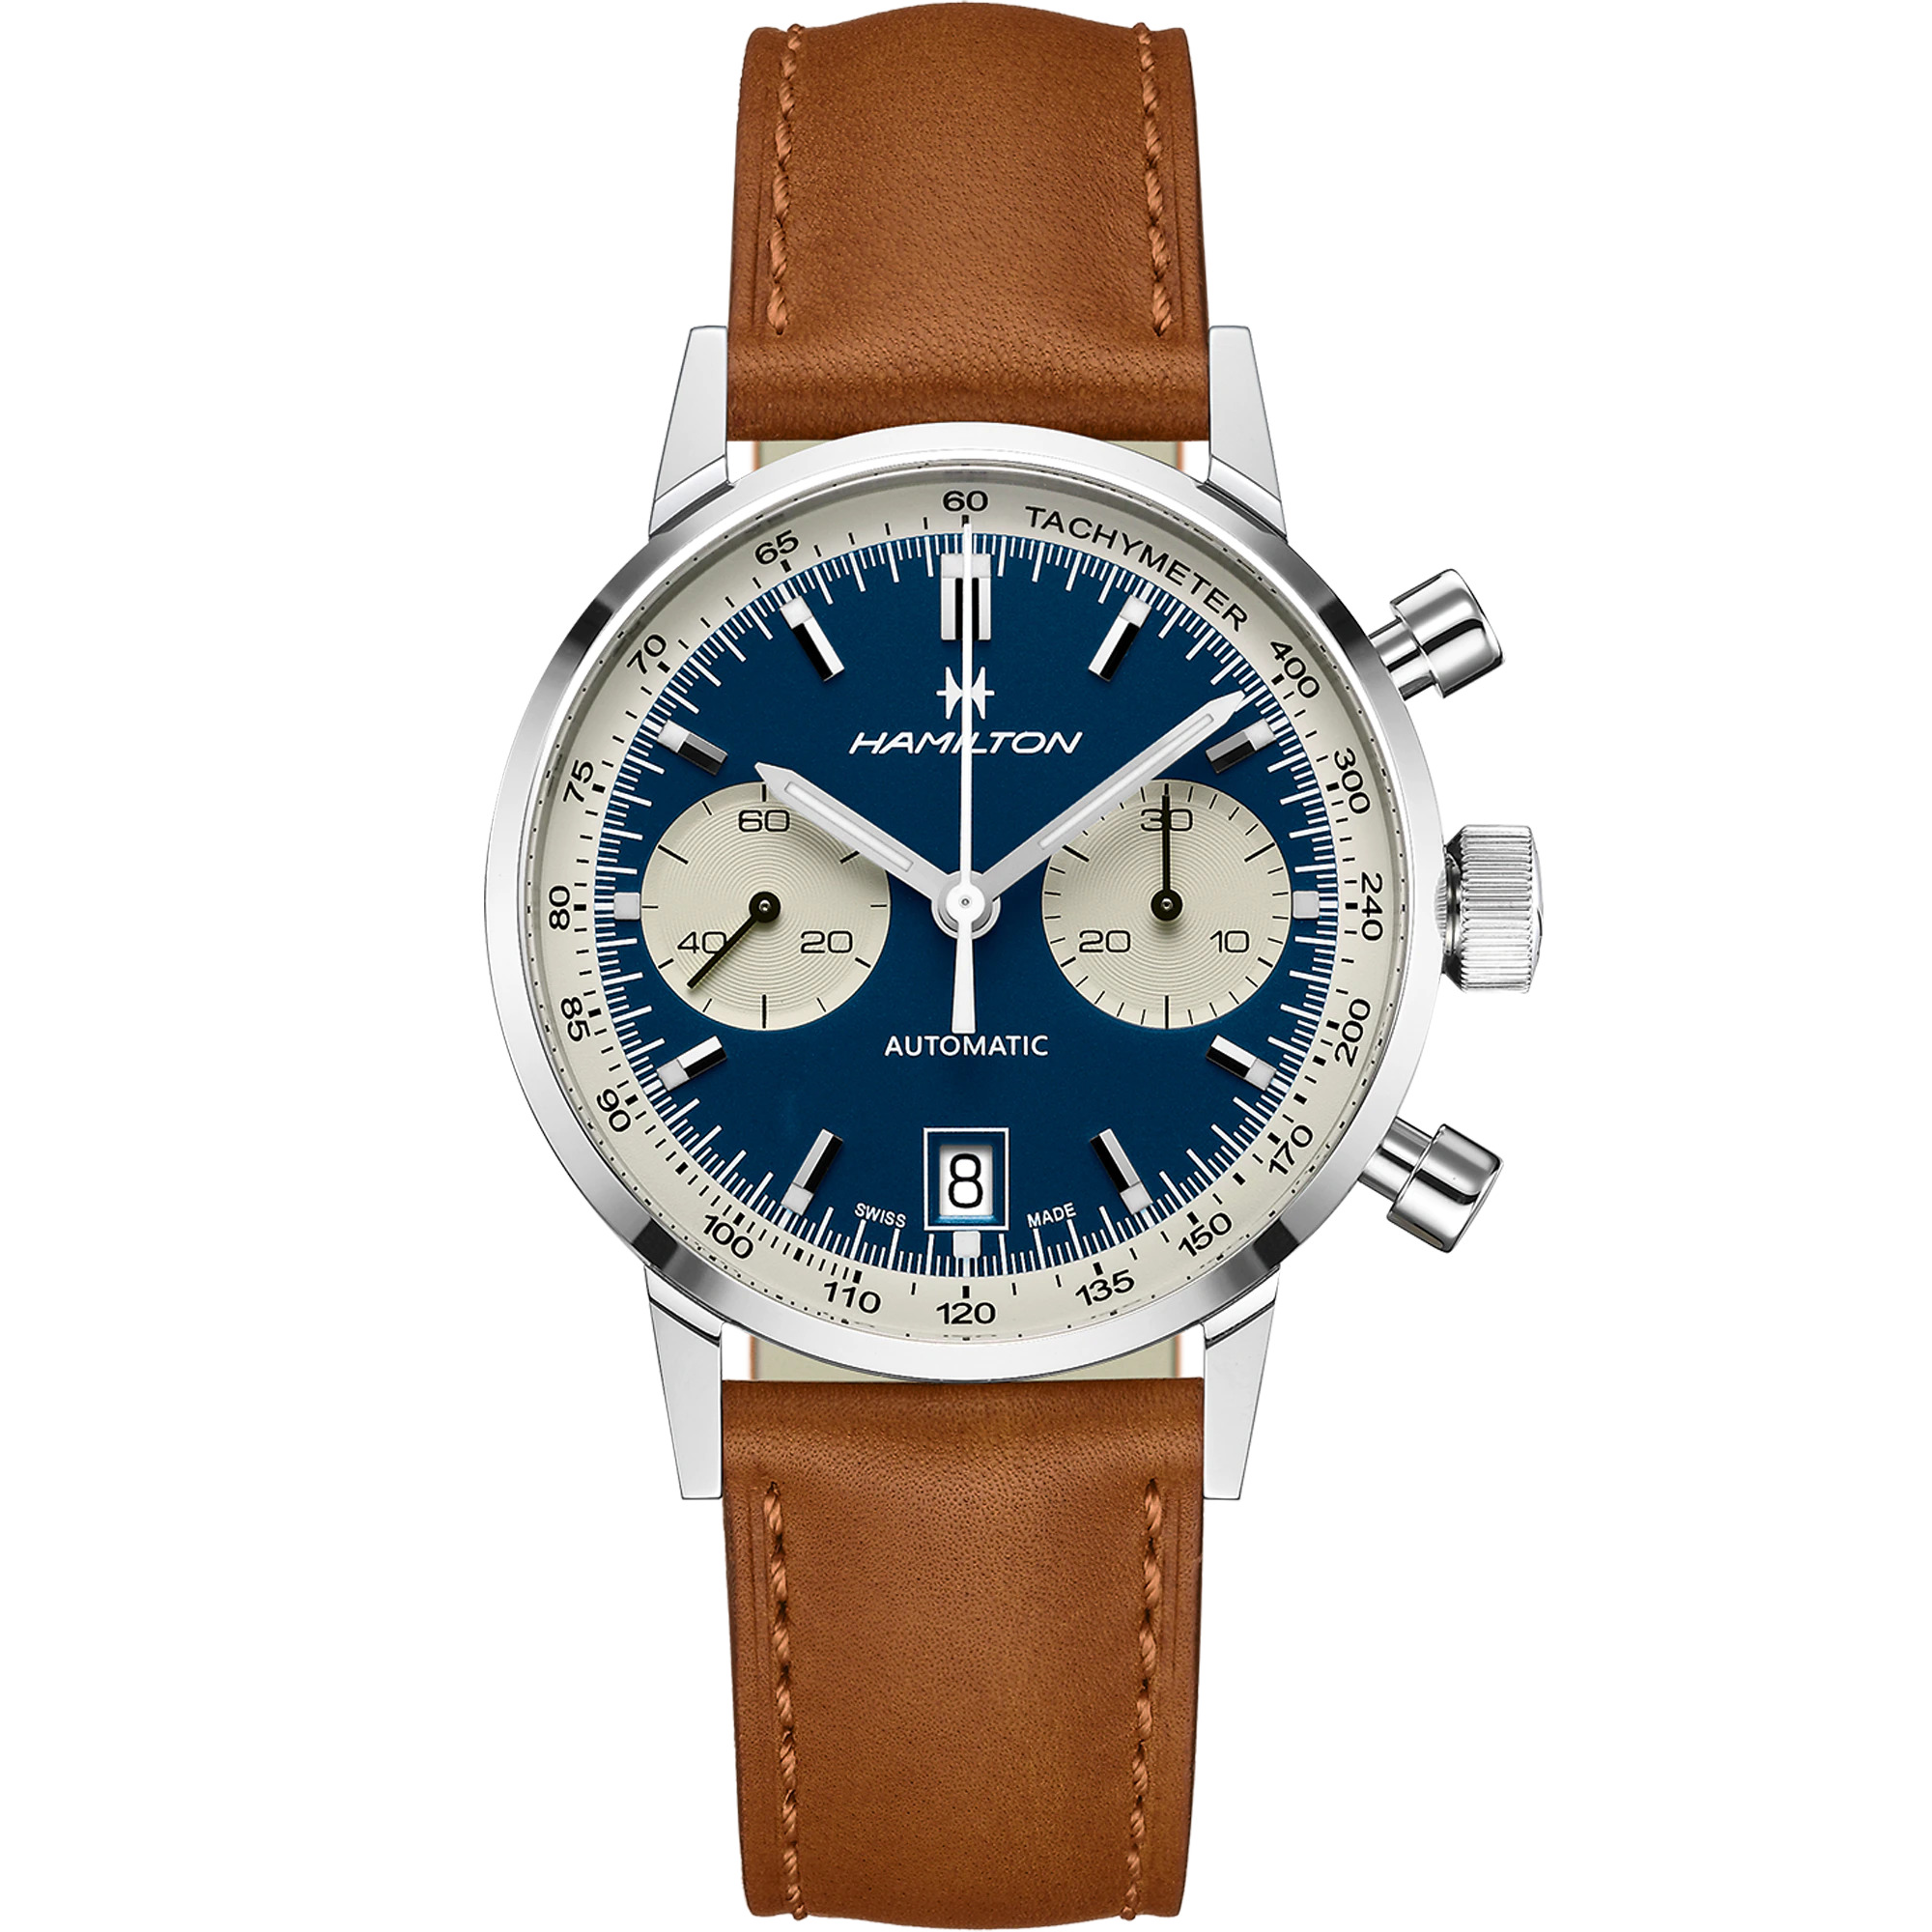 Hamilton: Stainless Steel Automatic Chronograph Intramatic 40mm Watch With Tan Starp
Dial Color: Blue